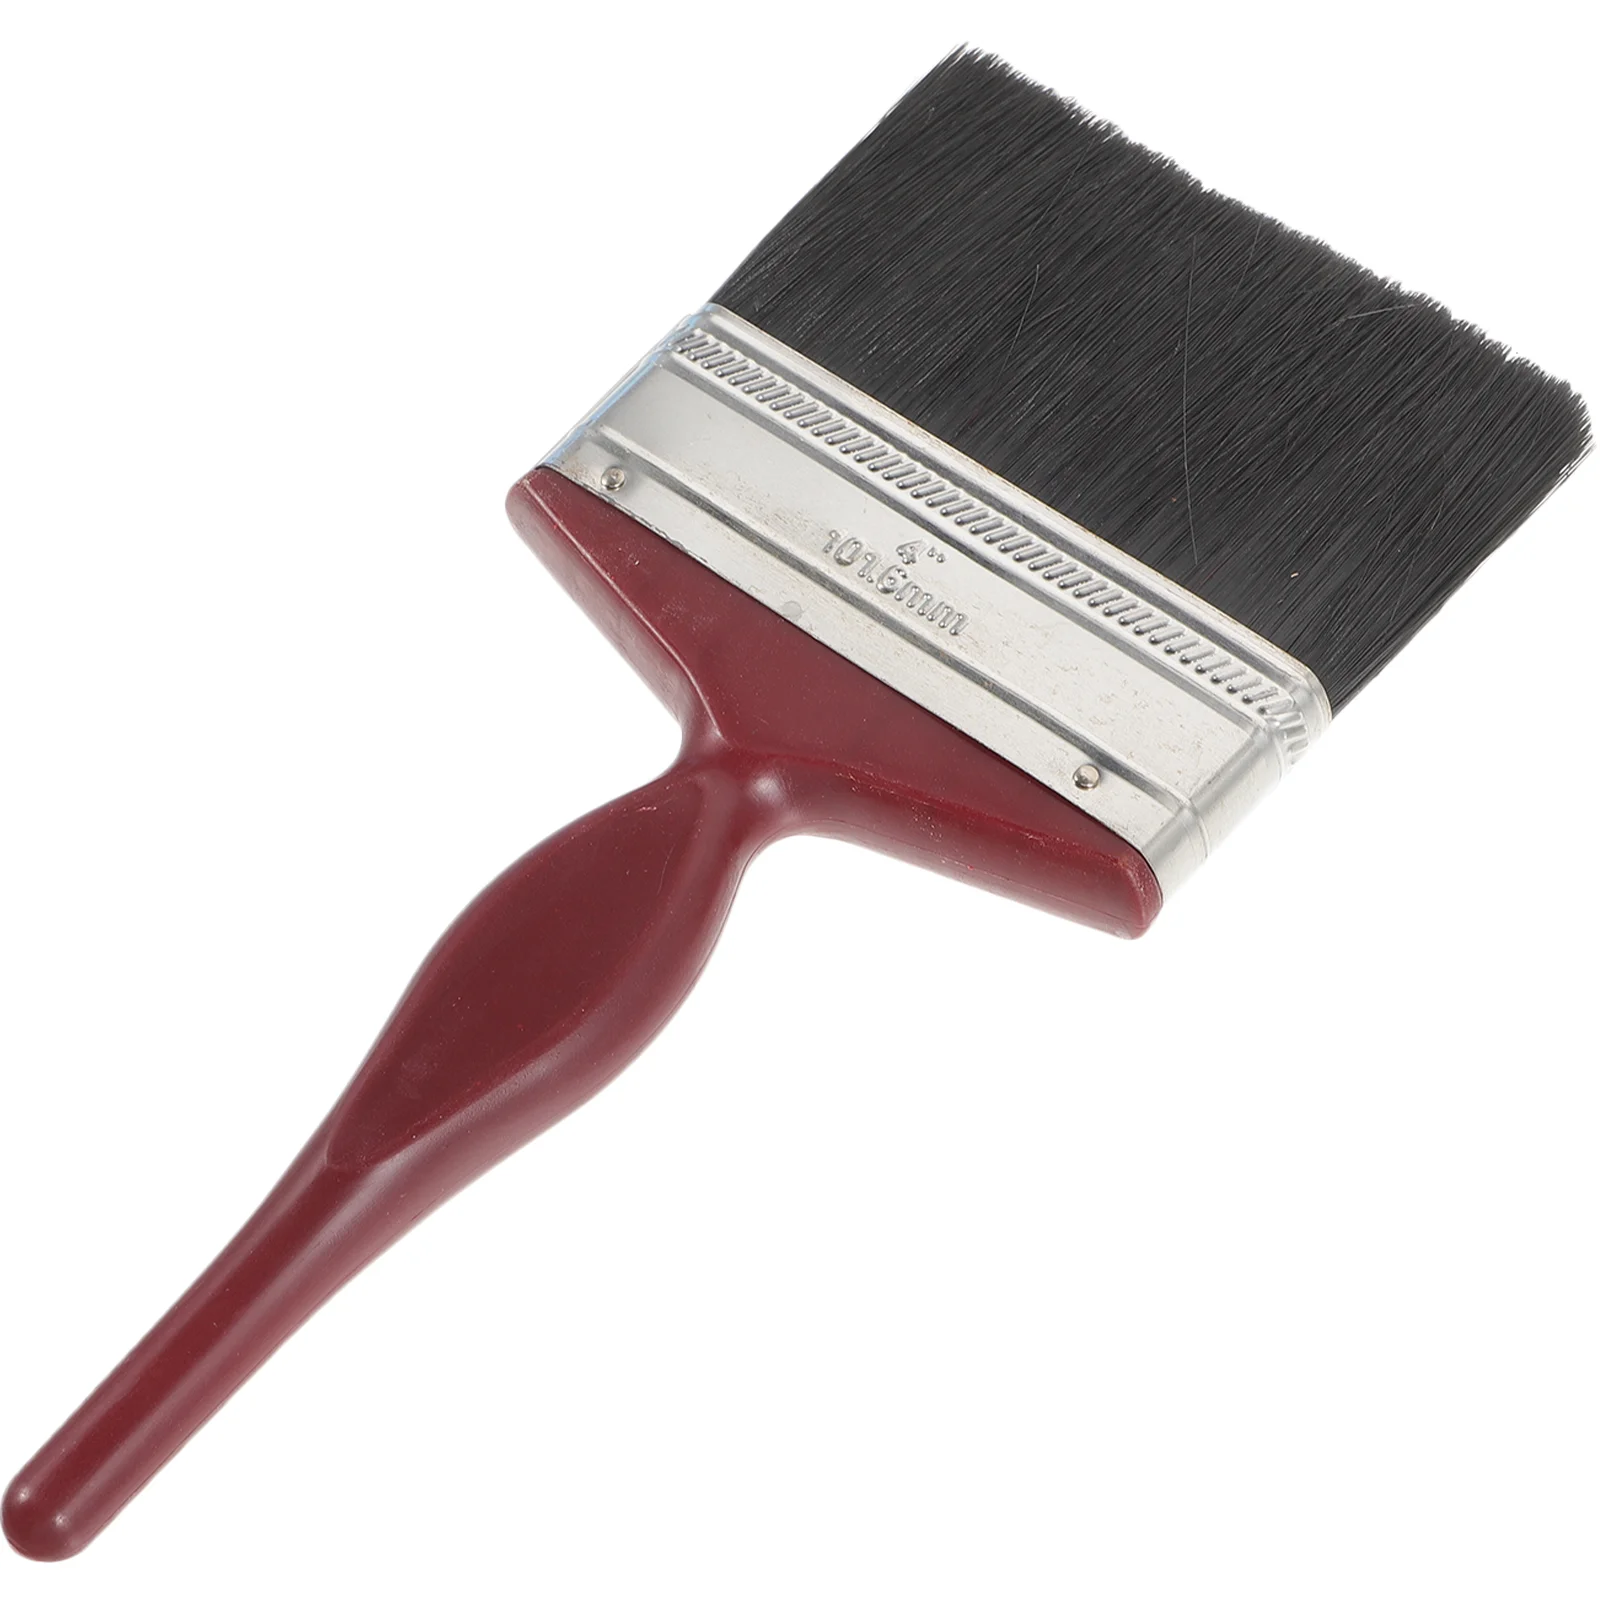 

Brush Walls Deck Stain Applicator Wide Brushes Wood Fence Paintbrush Painting